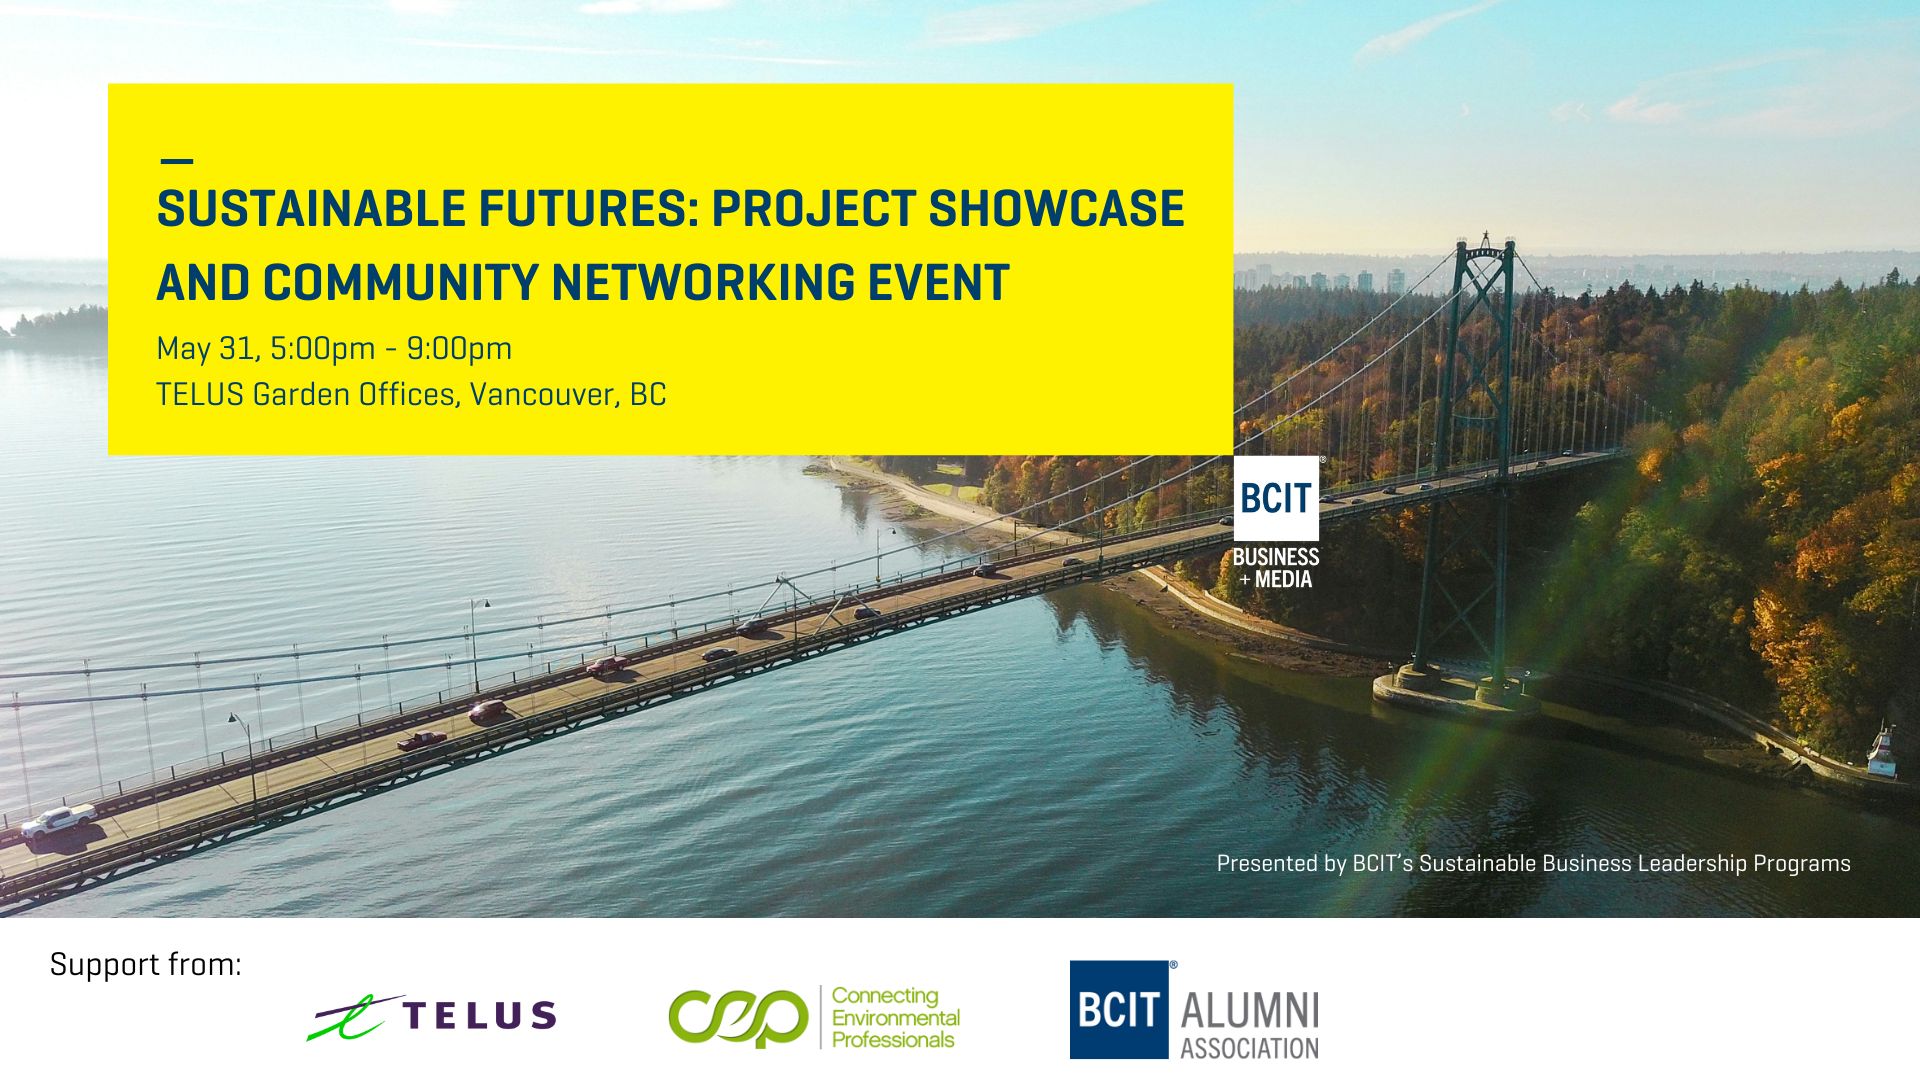 Sustainable Futures Project Showcase and Community Networking Event